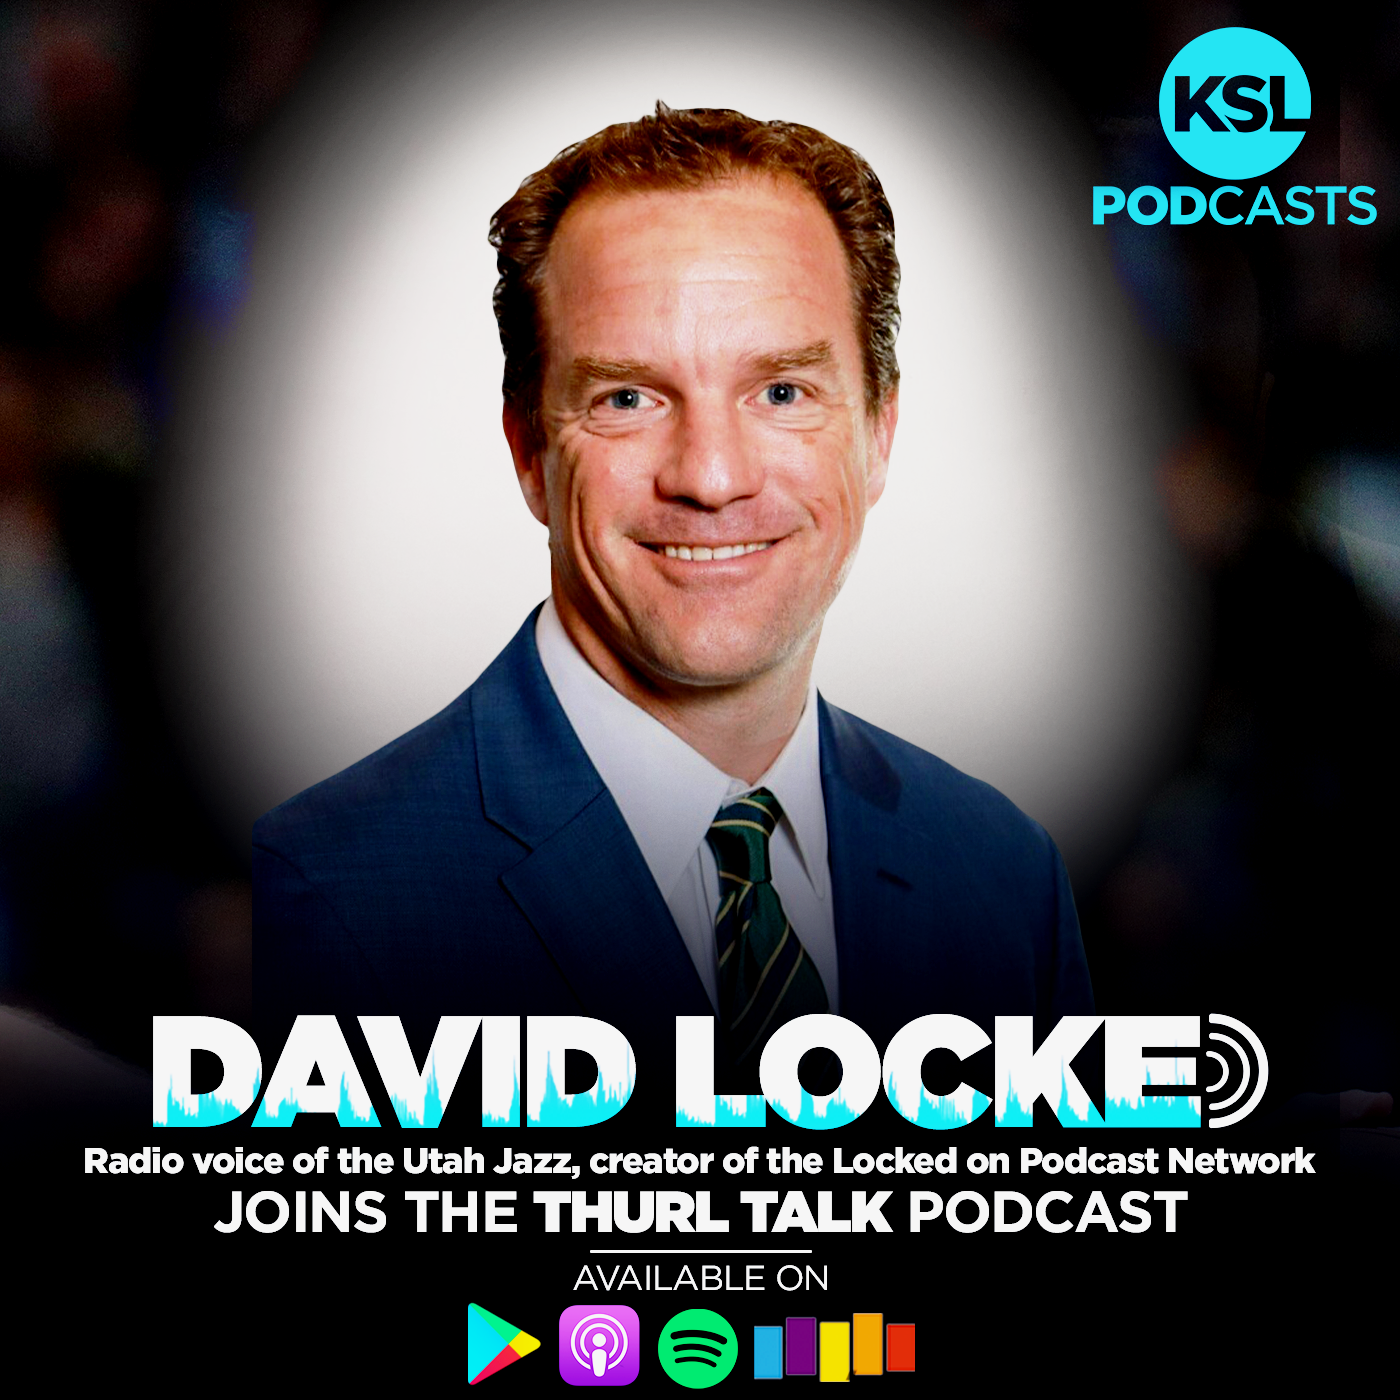 David Locke on predicting the NBA's return, the Utah Jazz, and finding his voice as a broadcaster